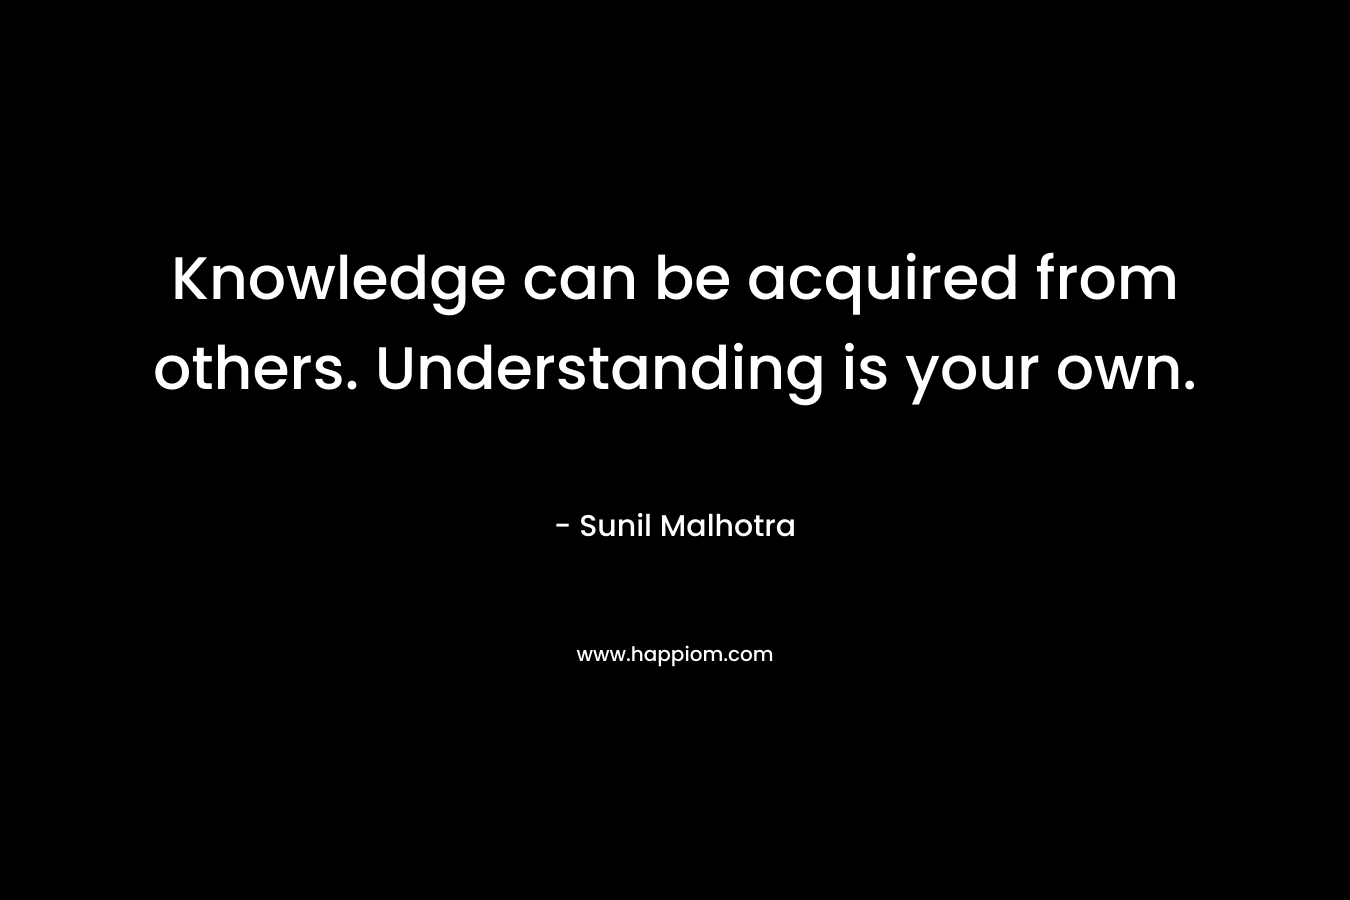 Knowledge can be acquired from others. Understanding is your own.